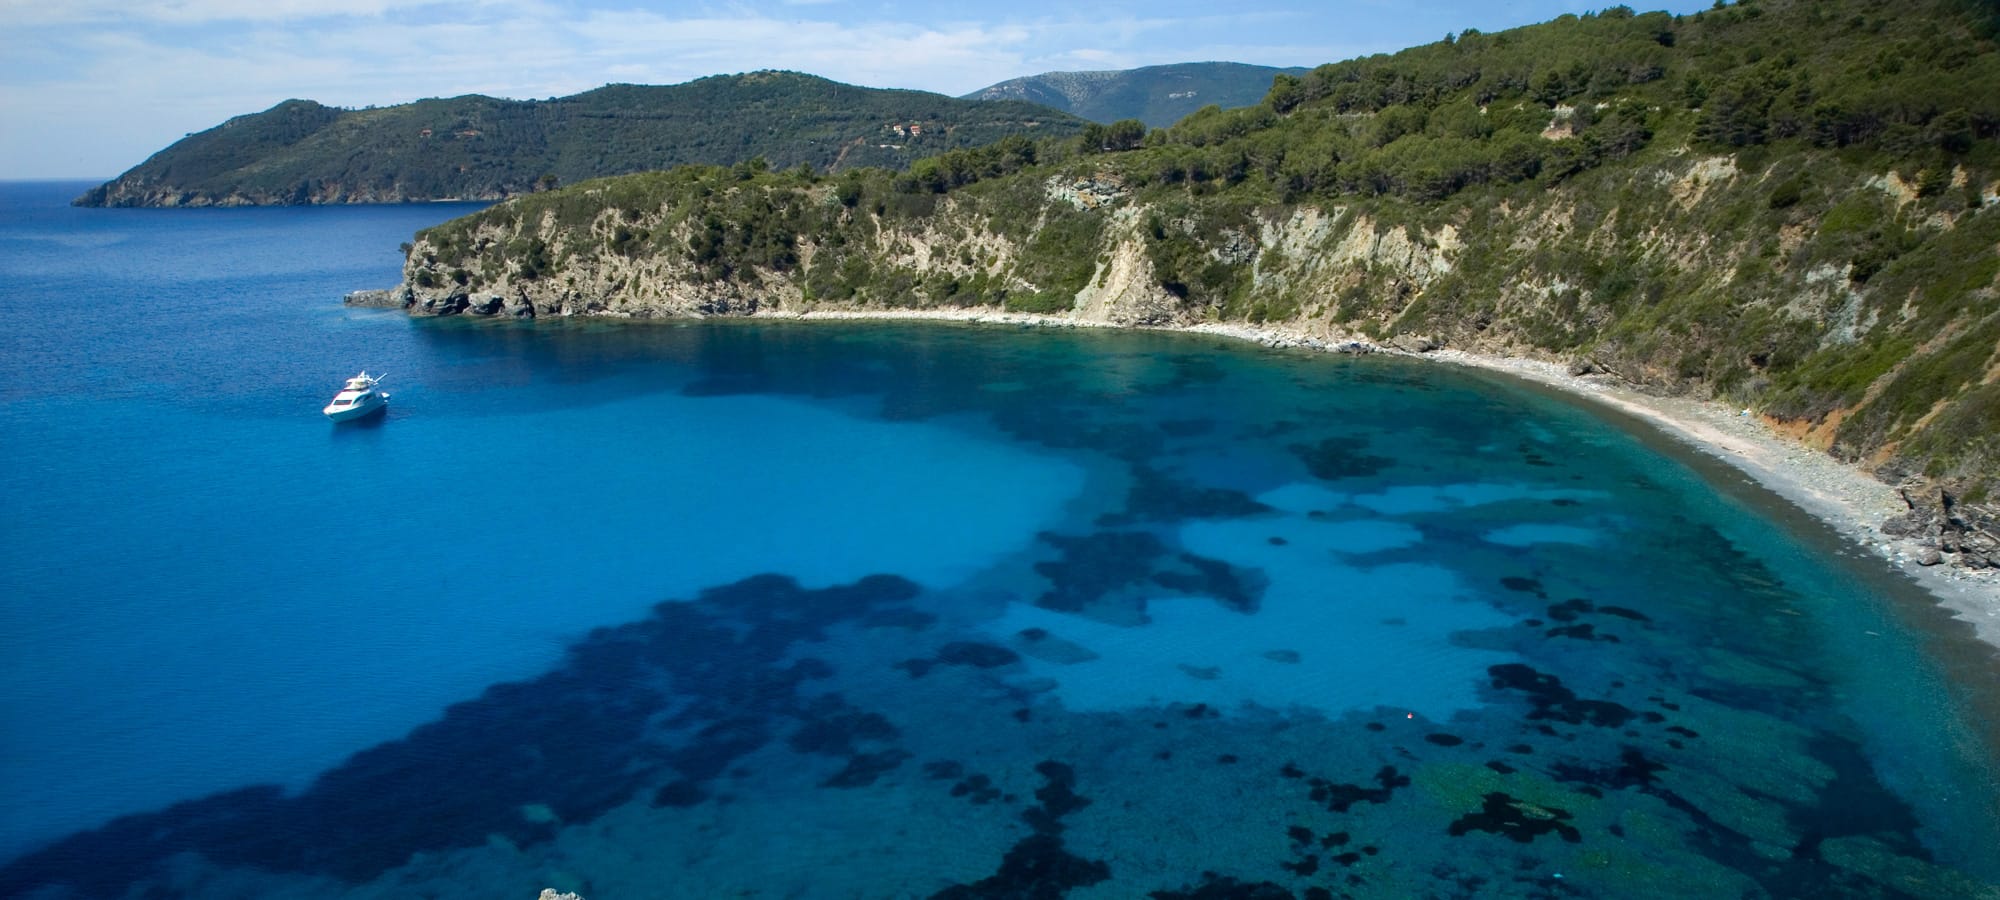 Acquarilli beach. Photo: Associated Management for Tourism of the Island of Elba